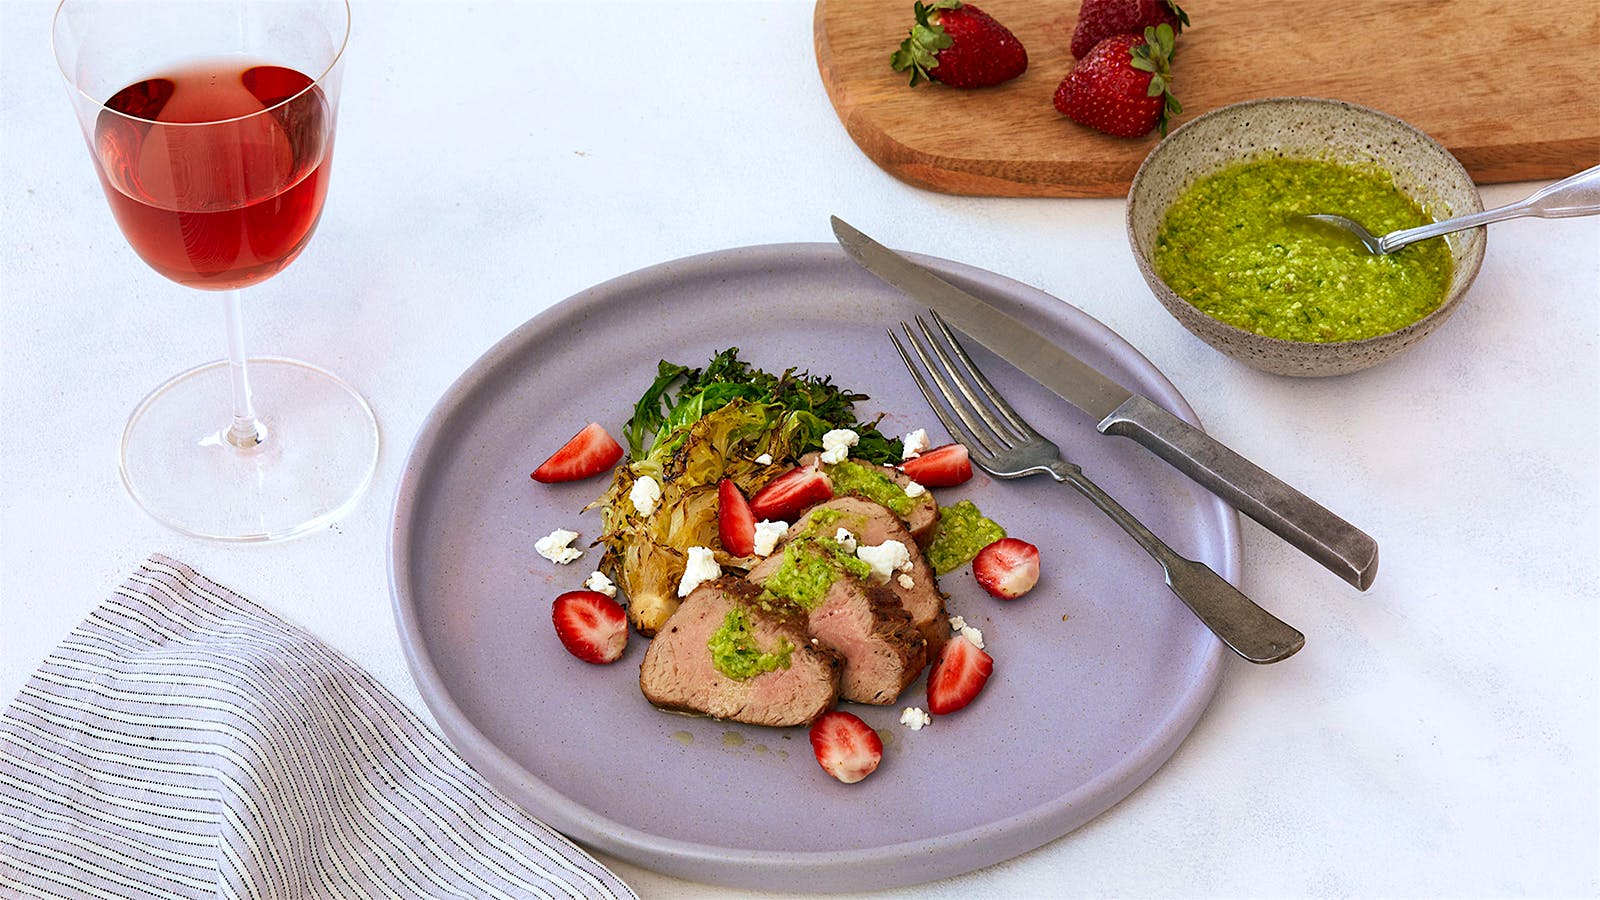 Perfect Match Recipe: Roast Pork Tenderloin with Pickled Strawberries, Goat Cheese and Ramp Pesto